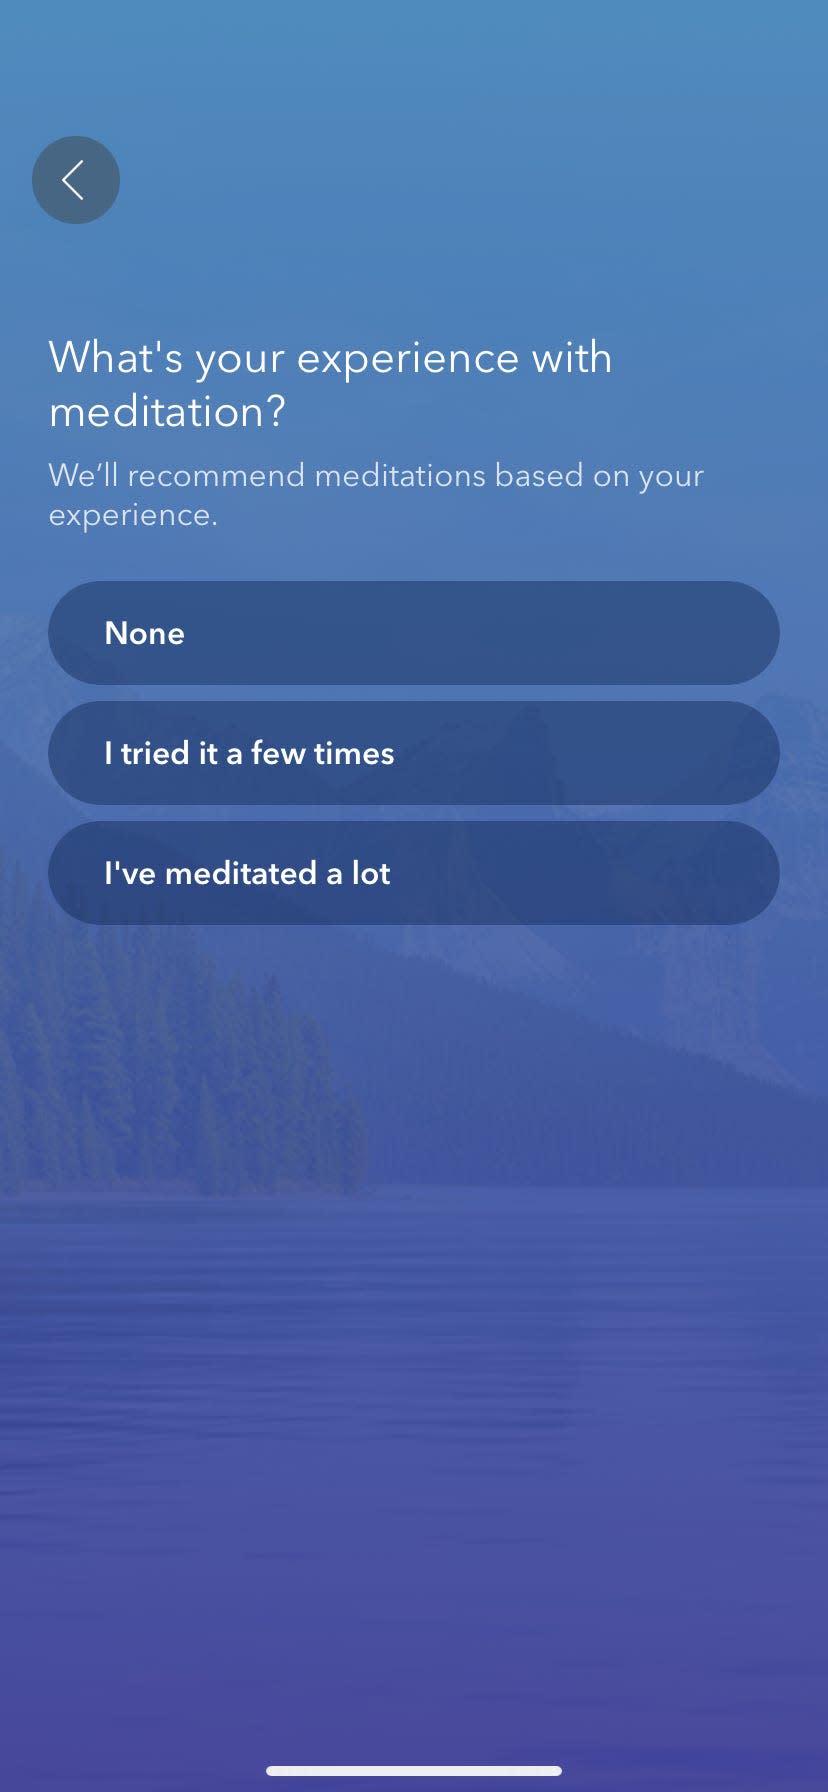 a blue screen and question "What's your experience with meditation?" in a screenshot of the meditation app Calm